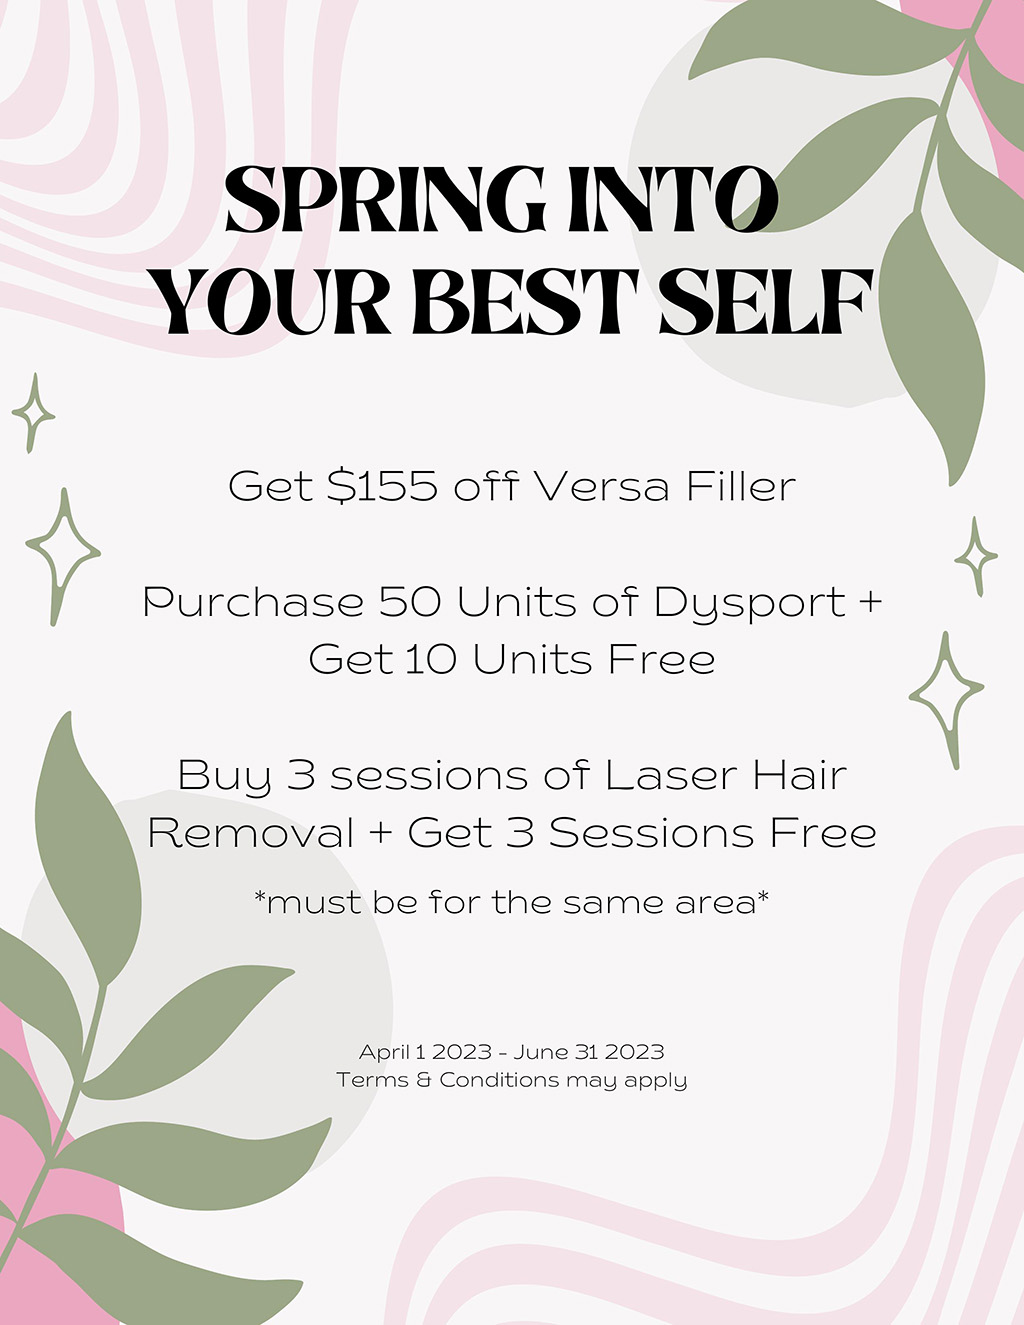 Spring into your best self!